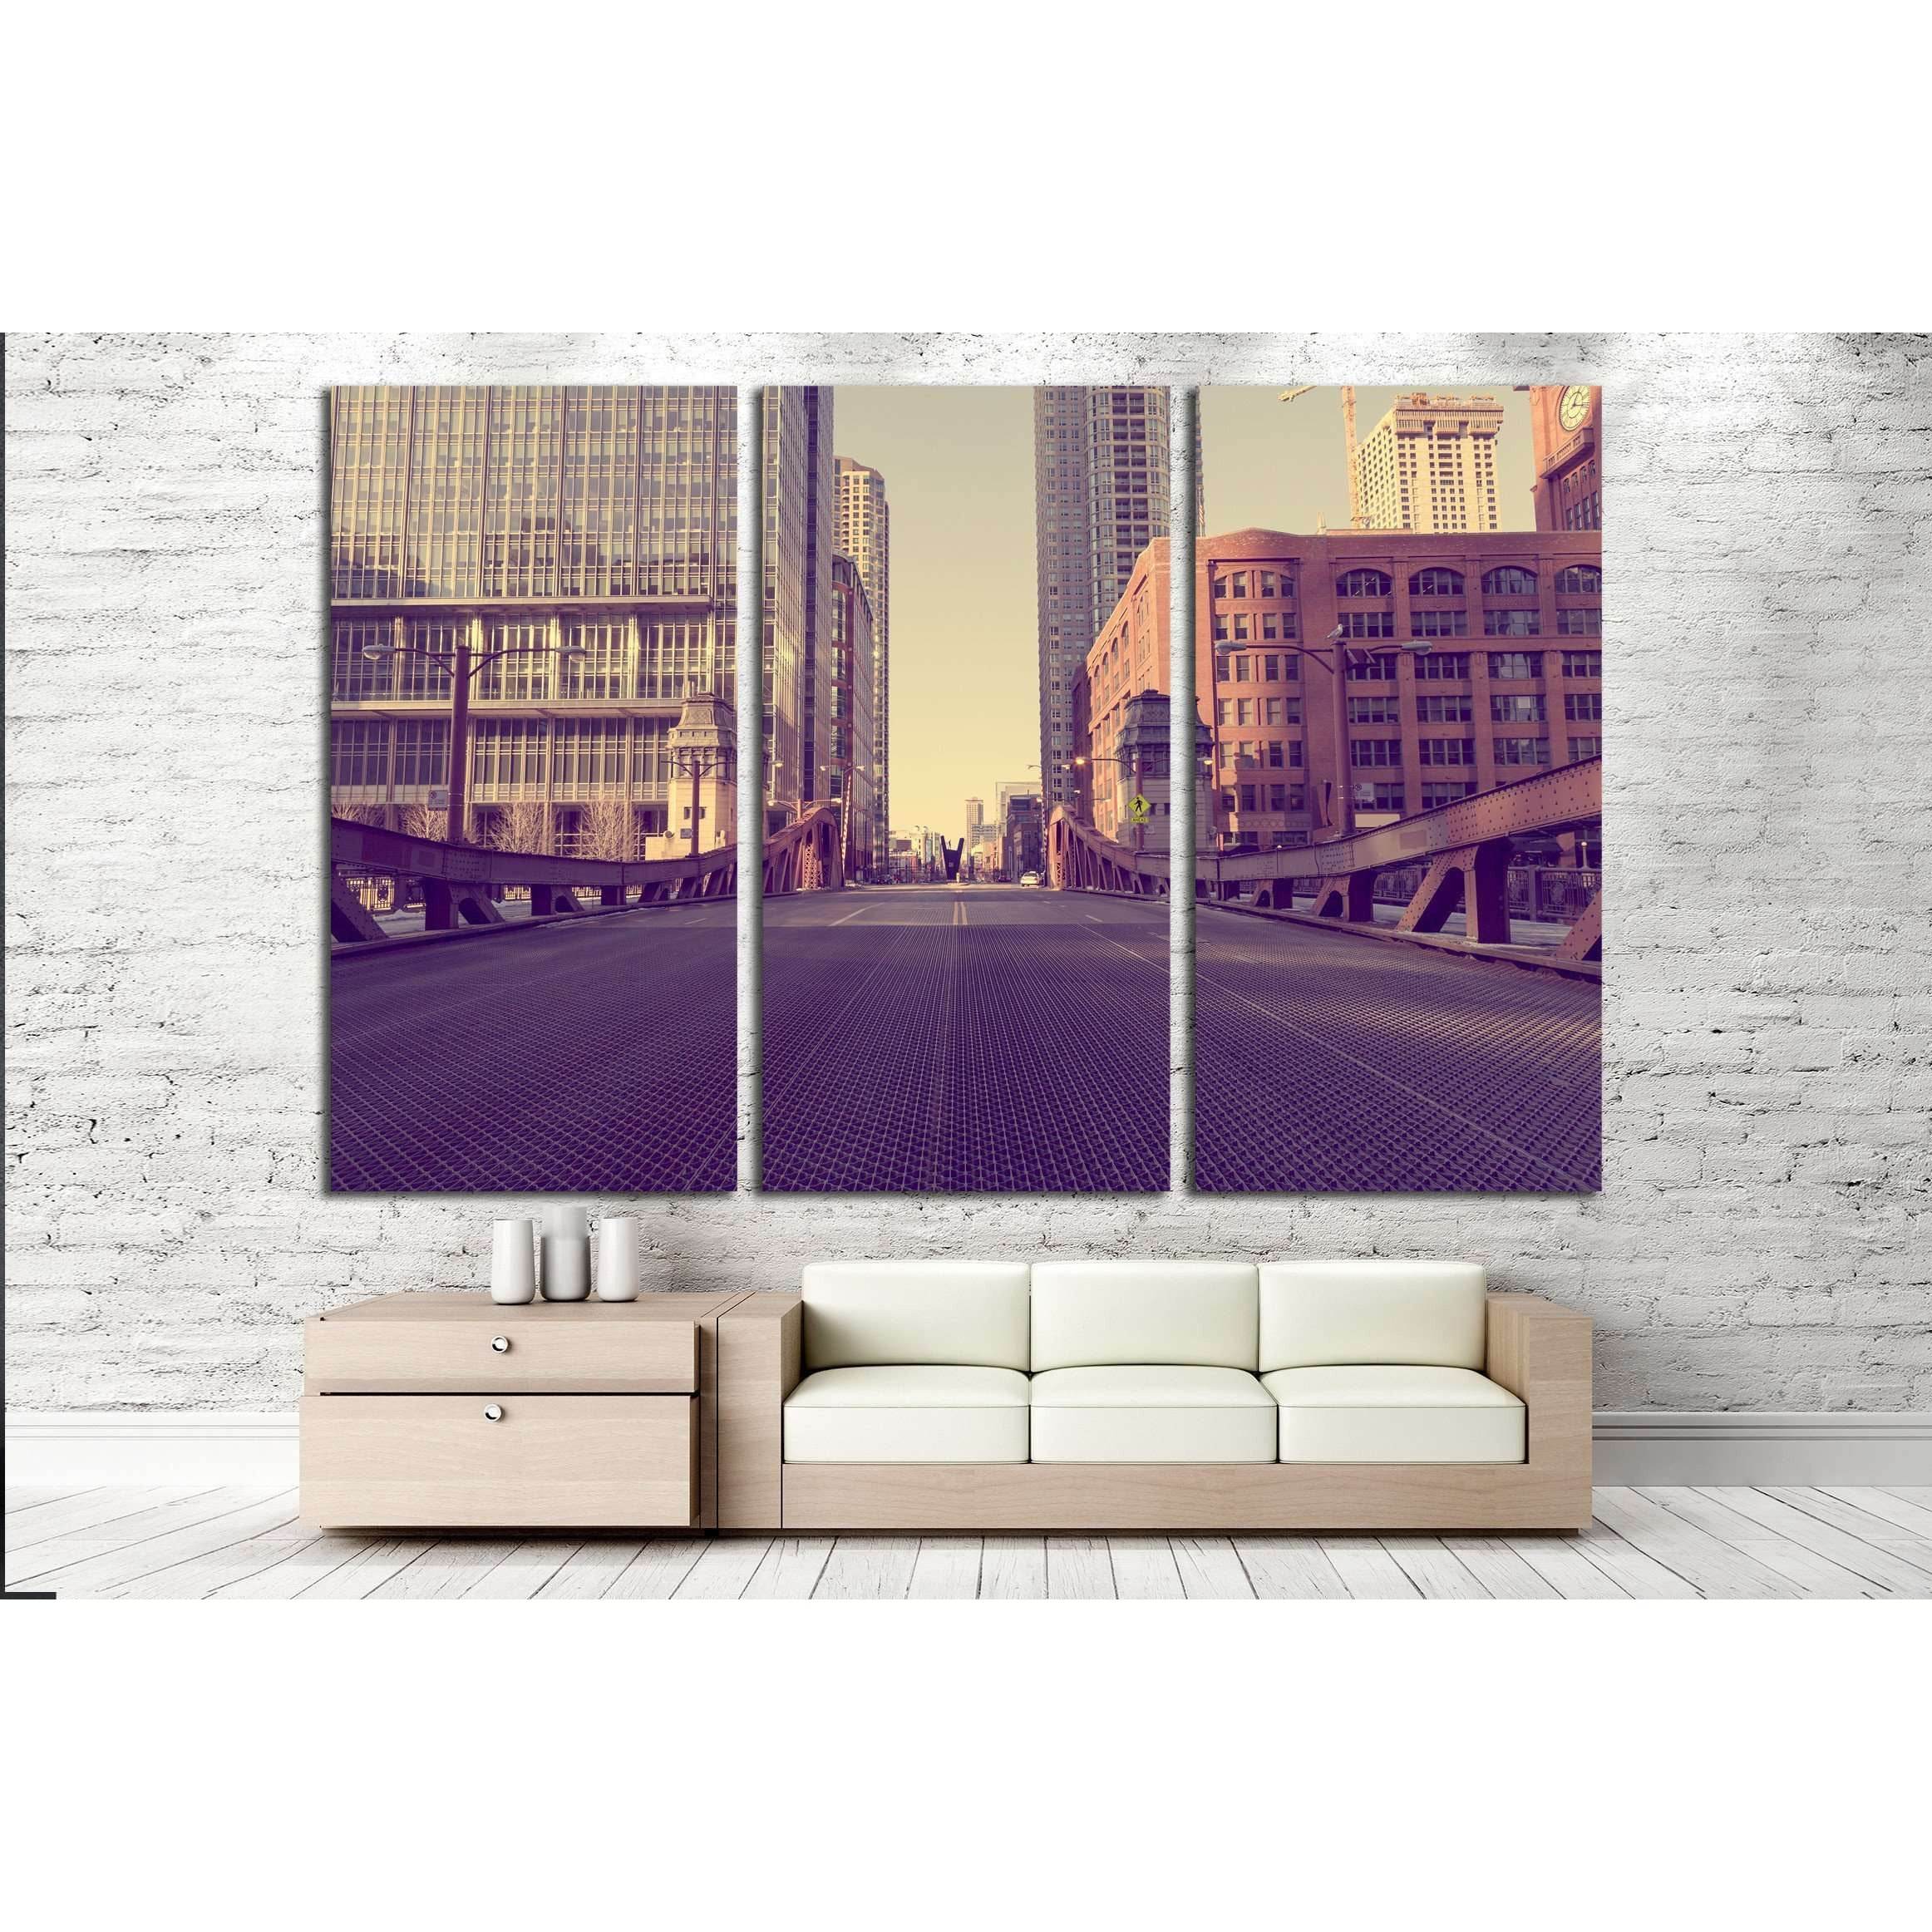 Chicago Bridge - Vintage Picture Effect №2158 Ready to Hang Canvas Print